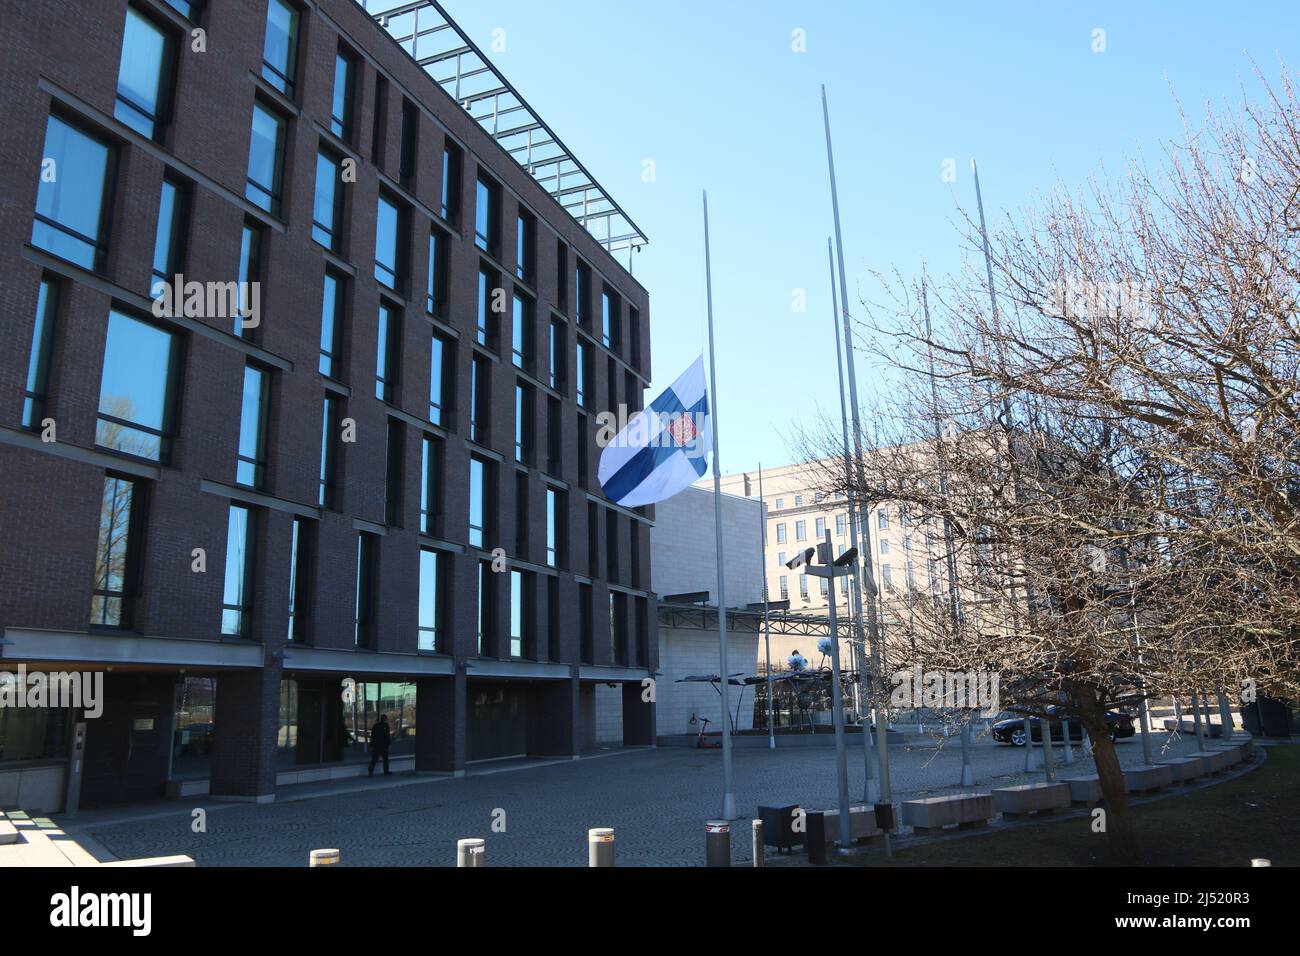 Parliament of Finland honouring dead MP Ilkka Kanerva.19.4.2022. Kanerva died 14.4.2022. Kanerva had been a member of Finland's parliament since 1975 and he was longest serving member of the parliament. Stock Photo